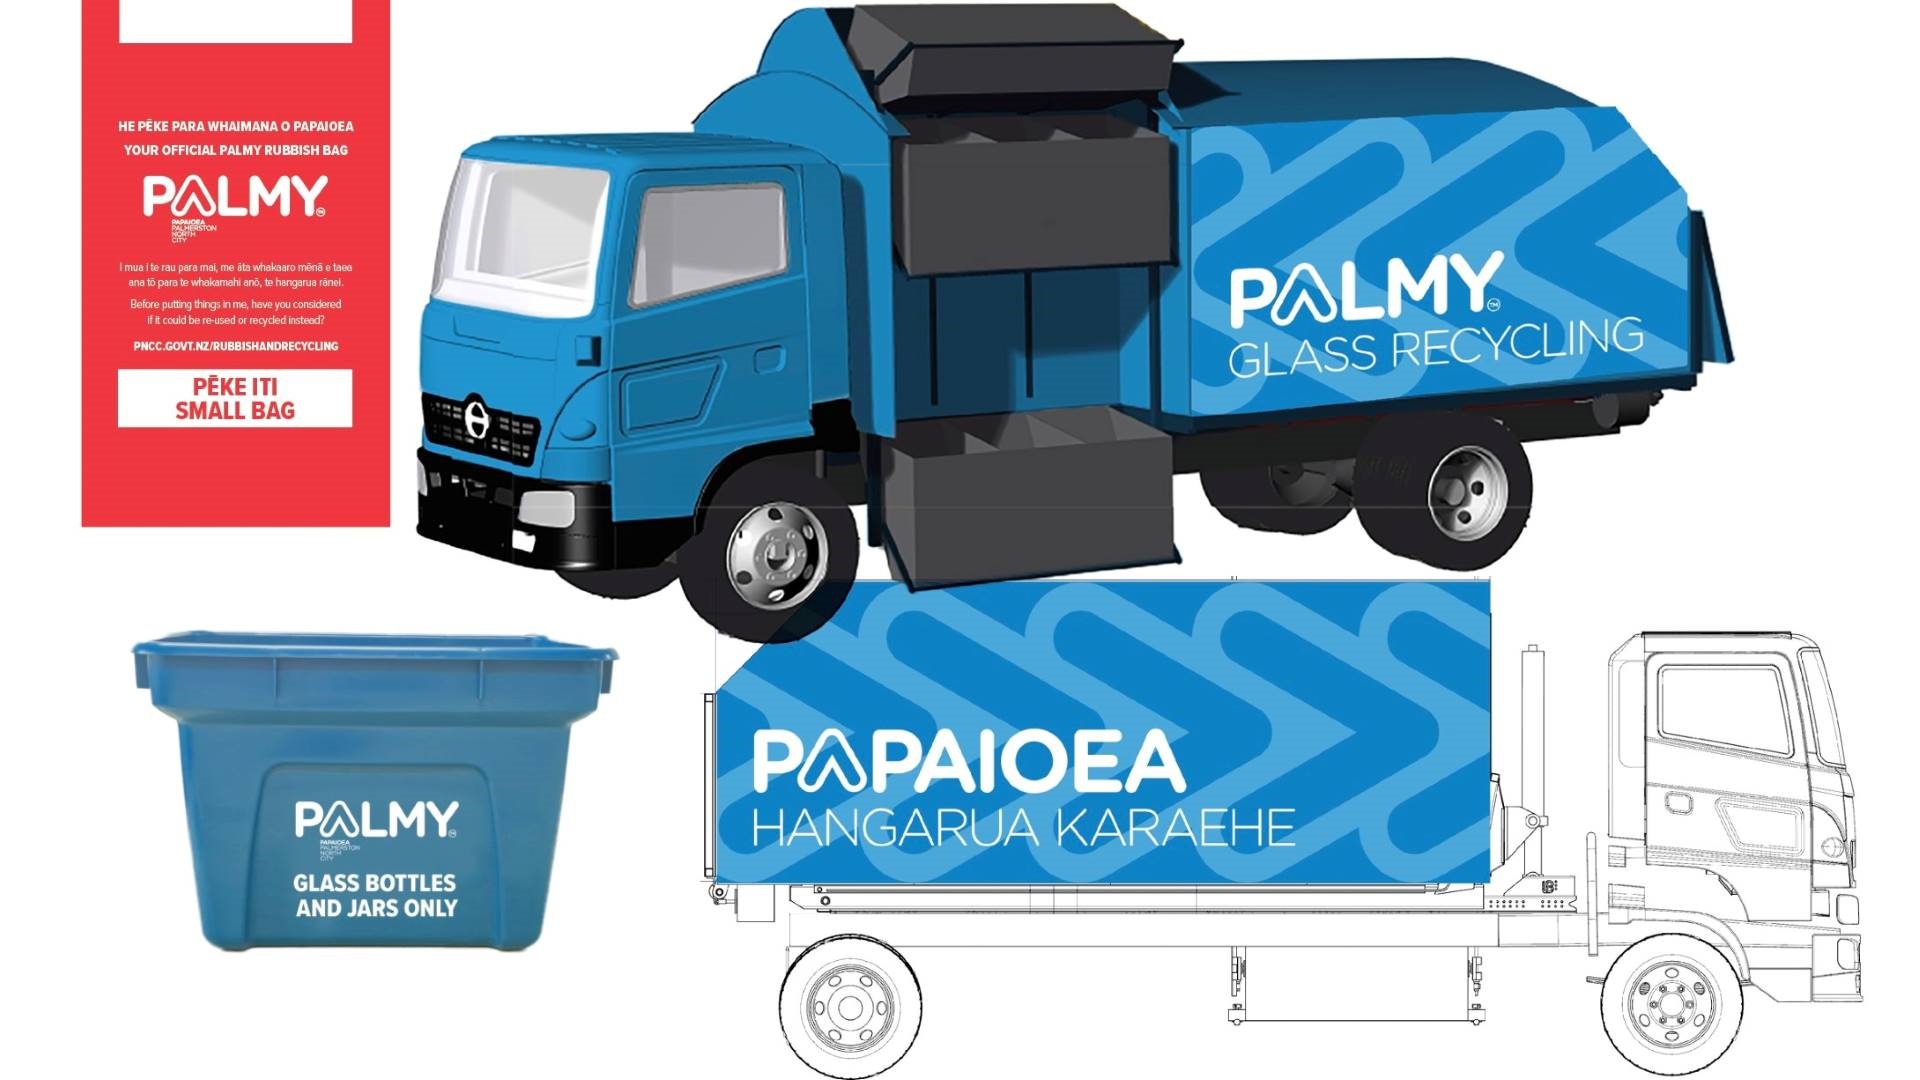  Photo shows how the new brand will be applied on a glass crate, rubbish bag and glass recycling truck.